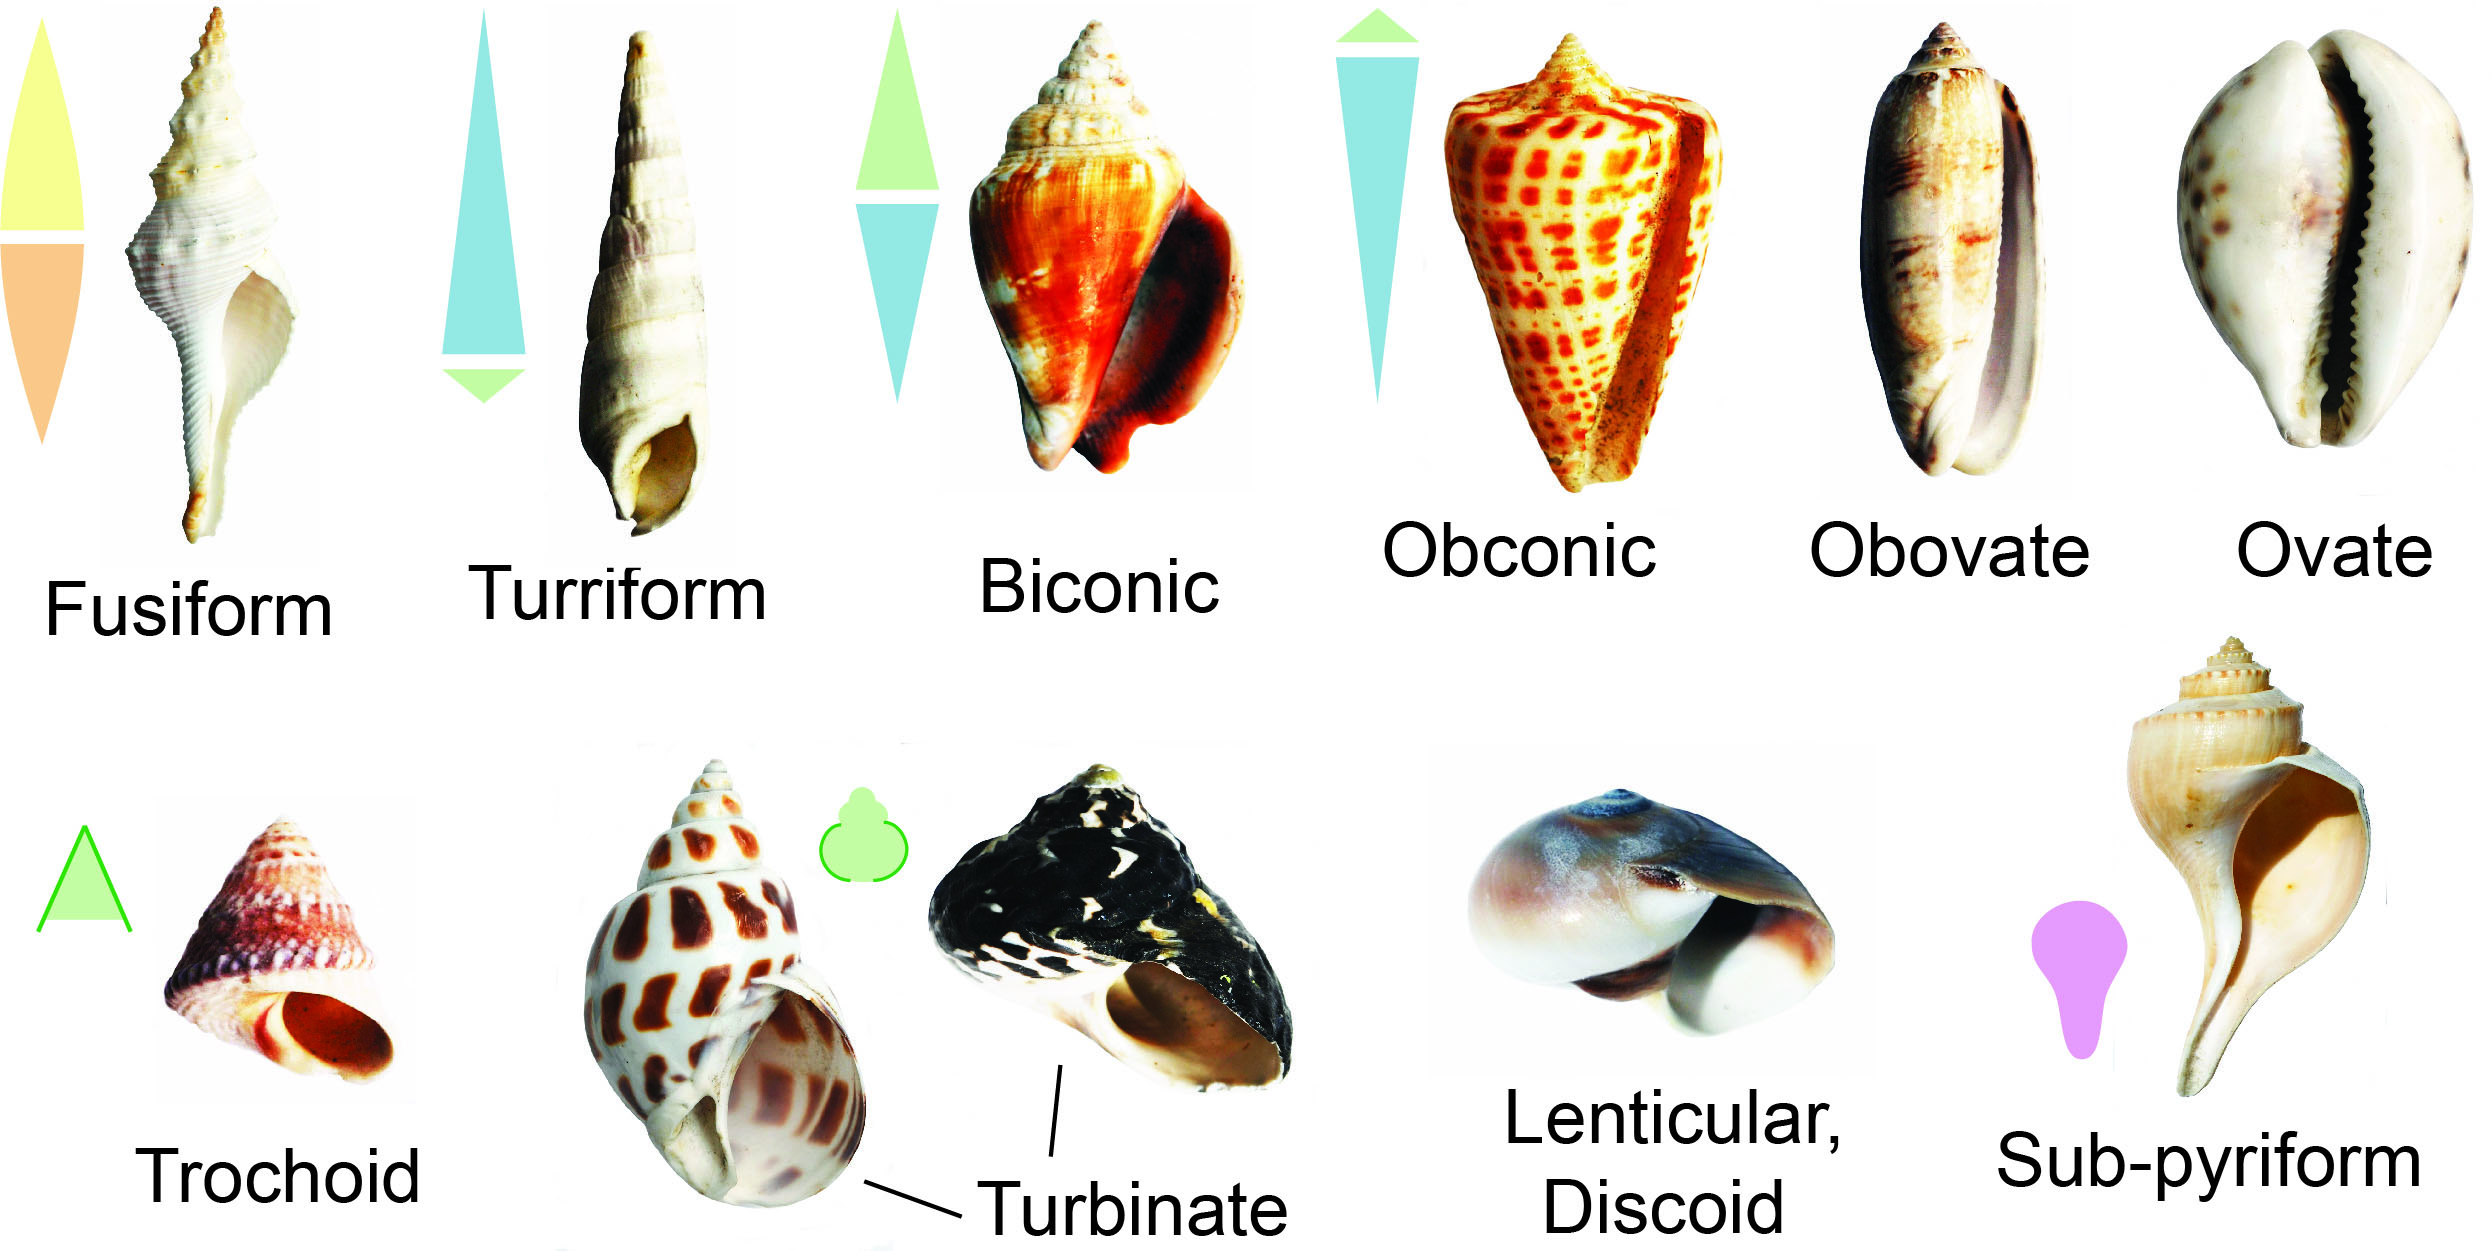 Some common terms for describing the outline shapes of gastropod shells, using modern gastropod shells as examples.